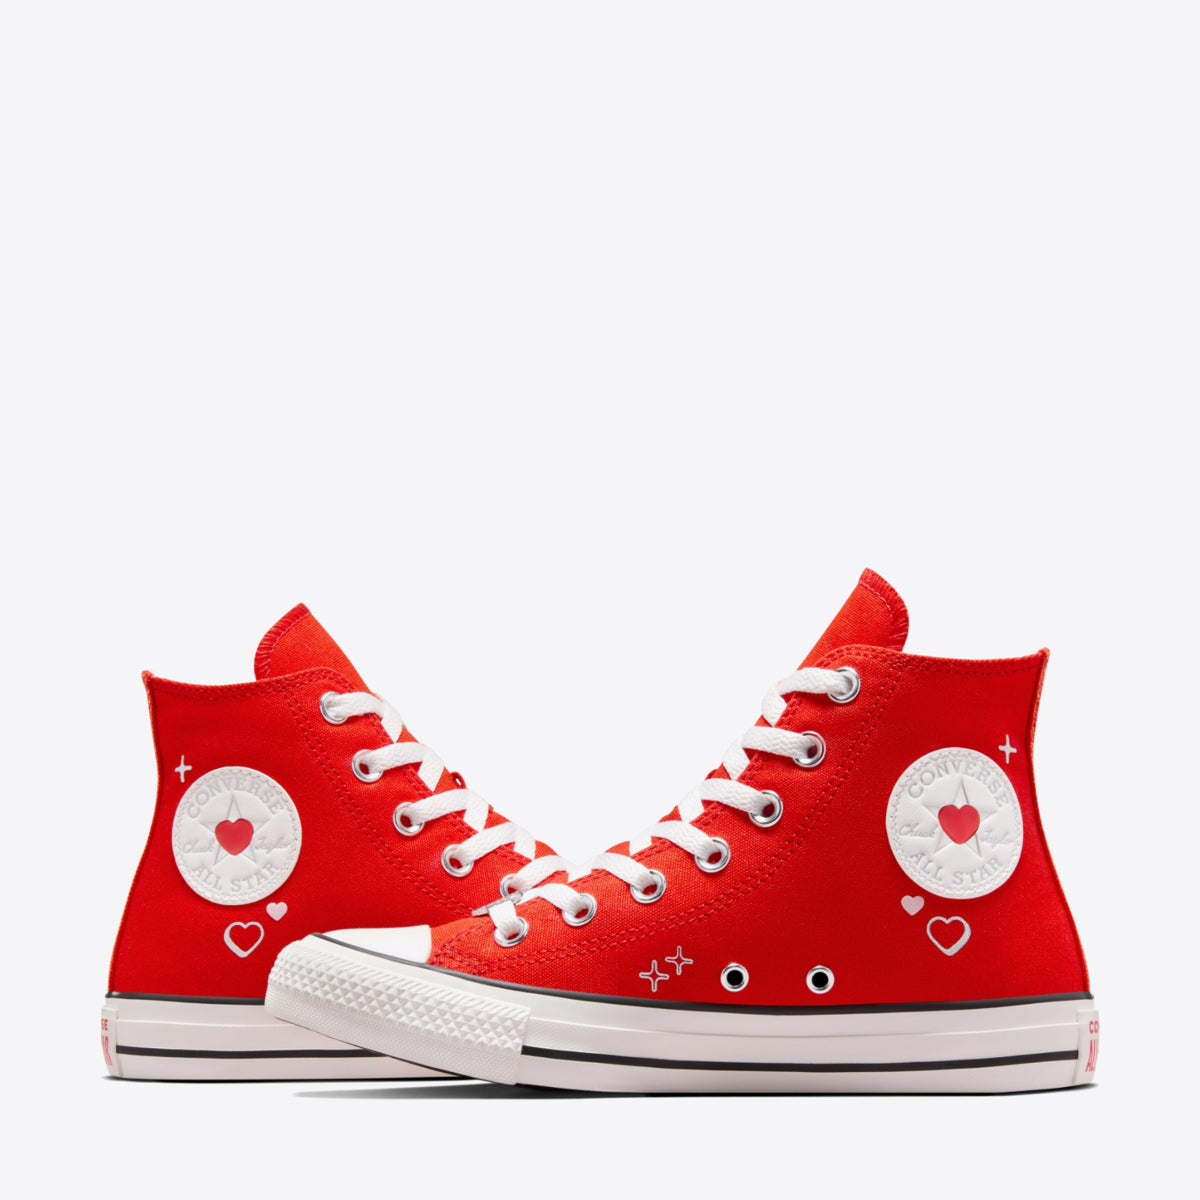 CONVERSE Chuck Taylor All Star BEMY2K High Fever Dream/Vintage White - Image 8